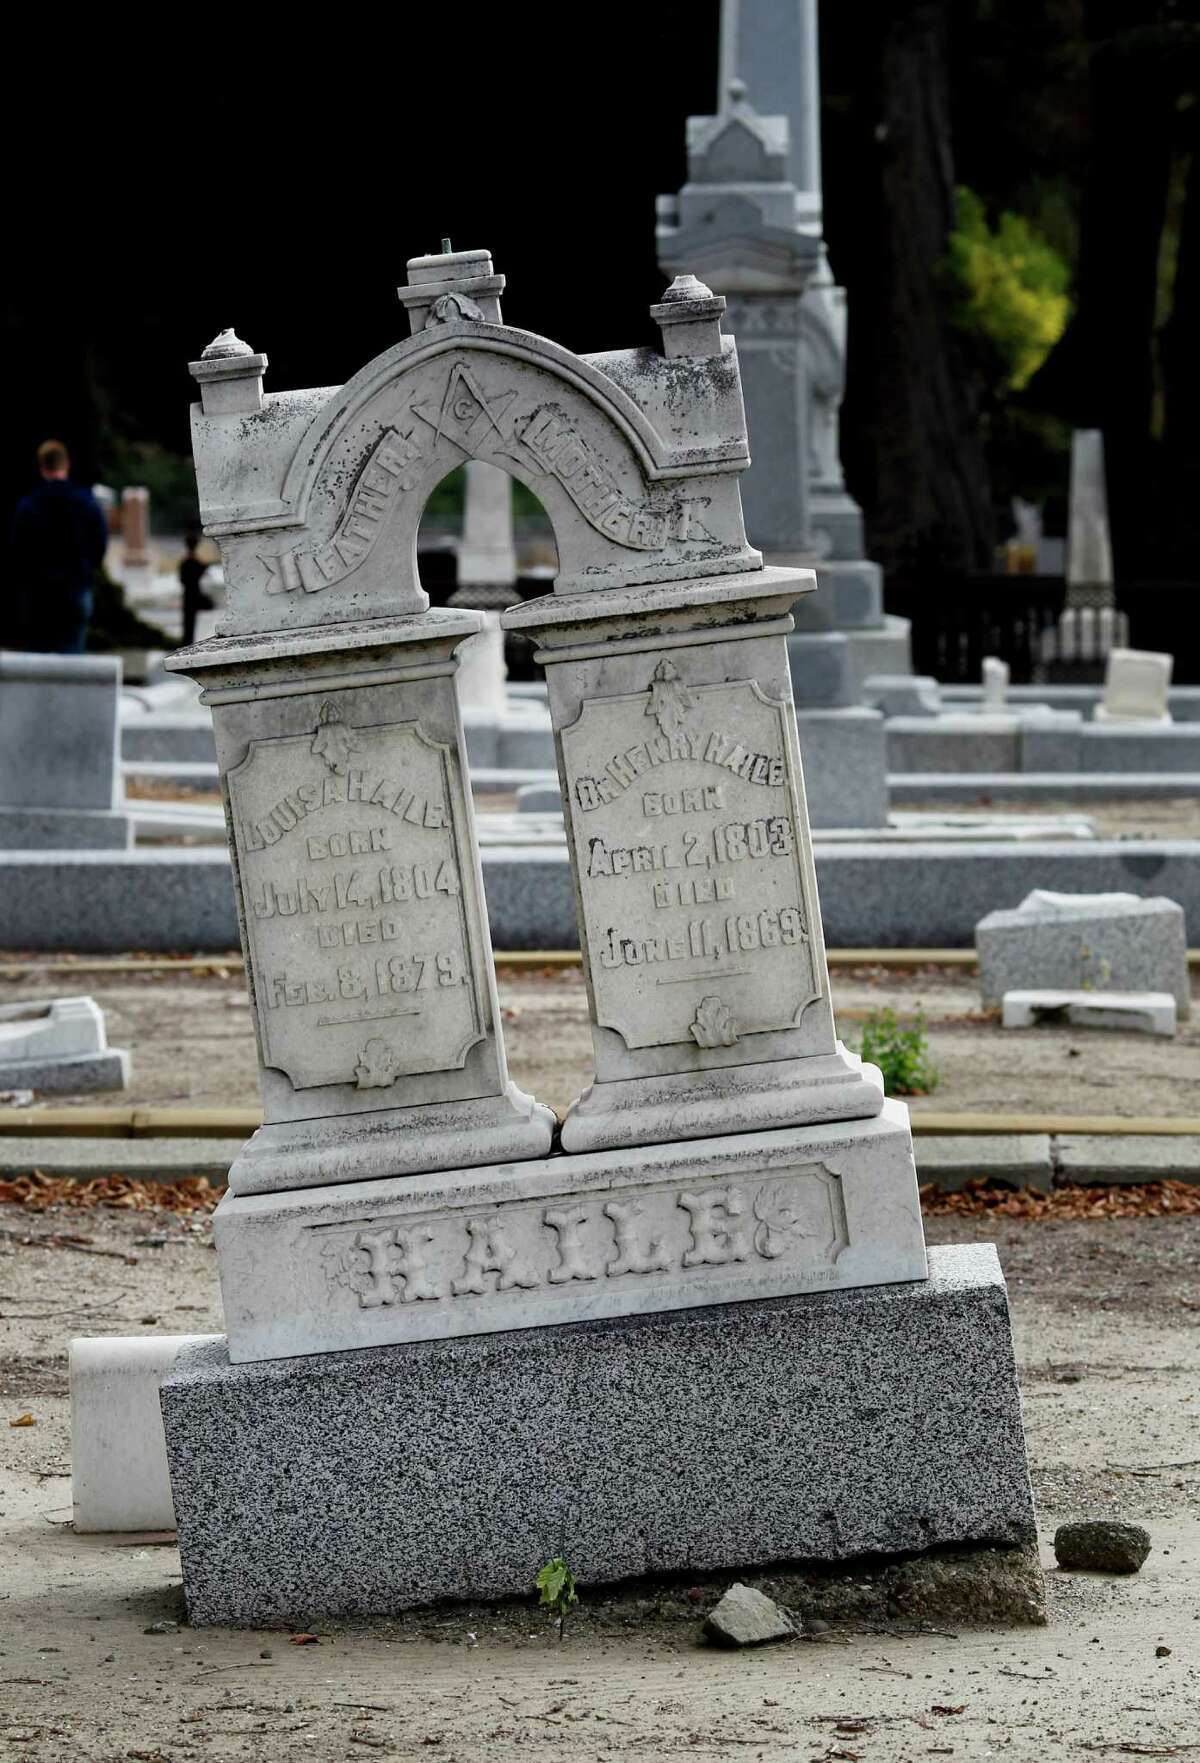 Local historians believe that decaying caskets underground at the San Lorenzo Pioneer Cemetery can shift monuments and grave markers. The cemetery has been closed for decades, but a group is trying to restore it. Its members lead paranormal tours to raise funds and talk about strange deaths at the cemetery and nearby McConaghy House.